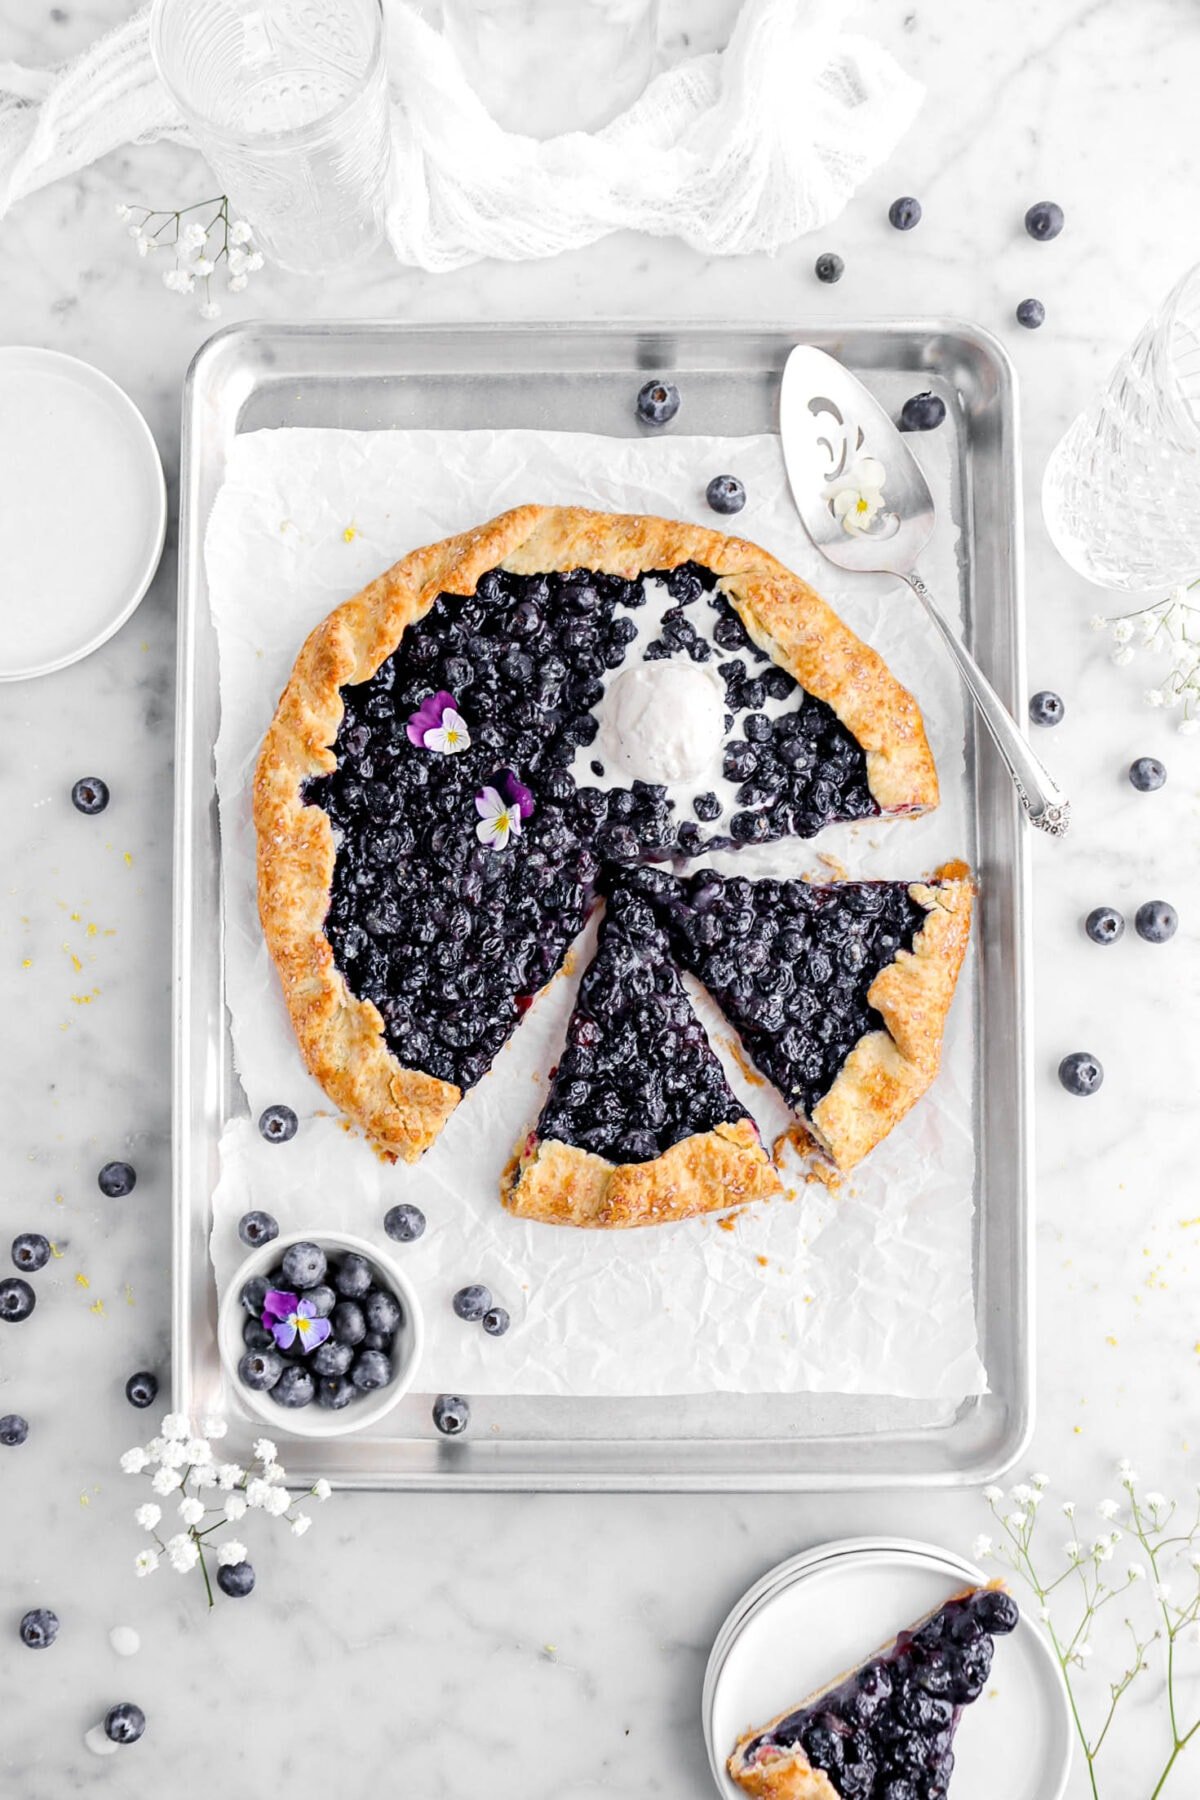 blueberry galette with two slices cut into it, with another slice on stack of white plates beside, with blueberries and white flowers around.